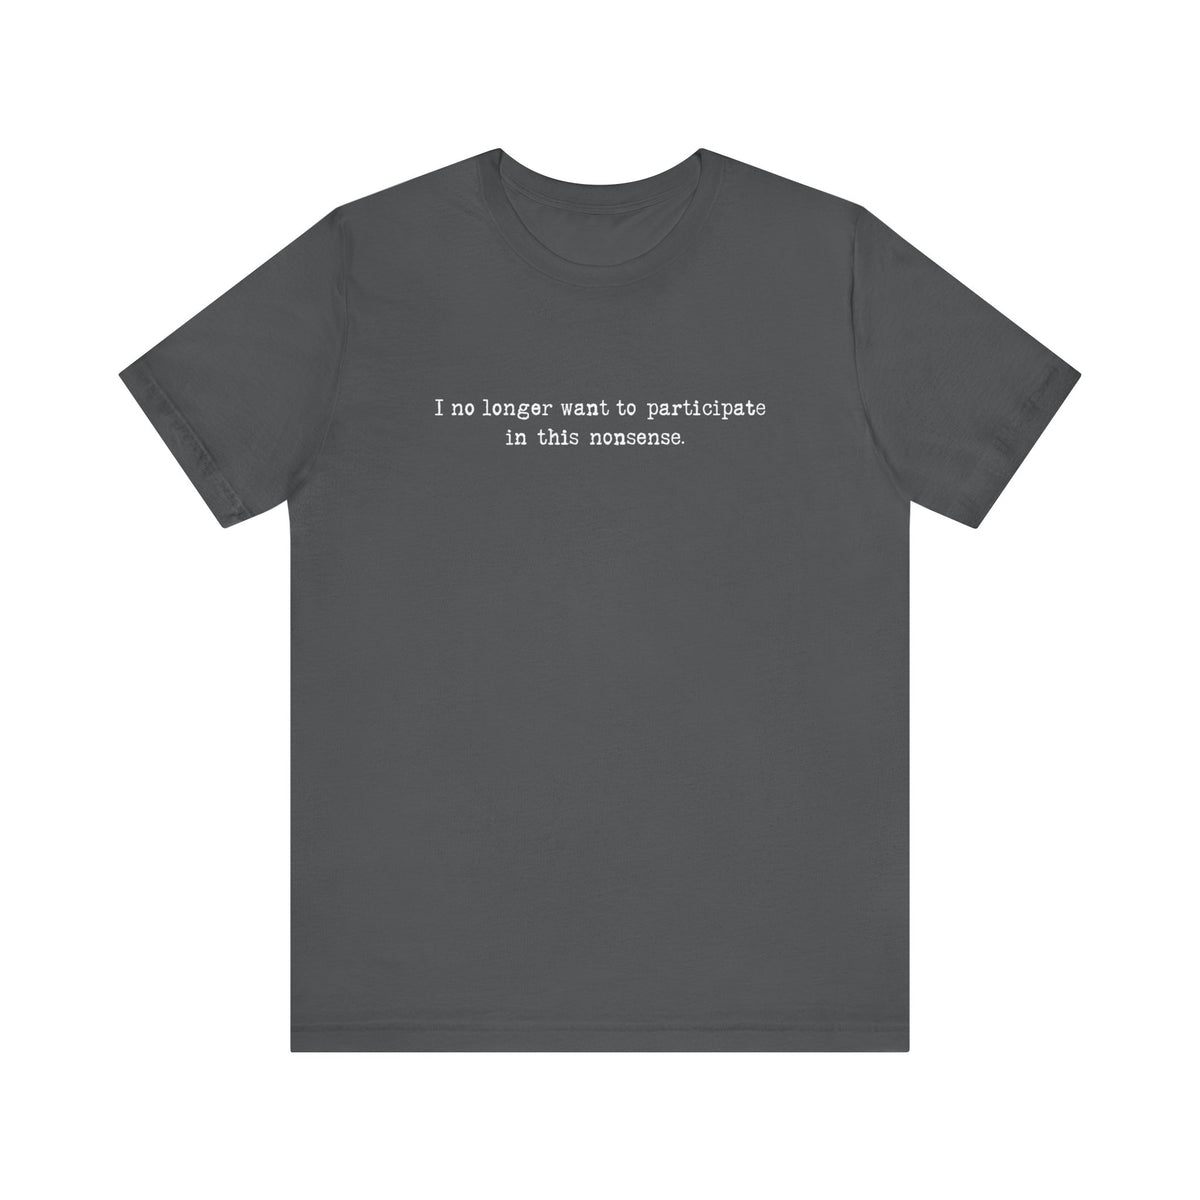 I No Longer Want To Participate In This Nonsense. - Men's T-Shirt